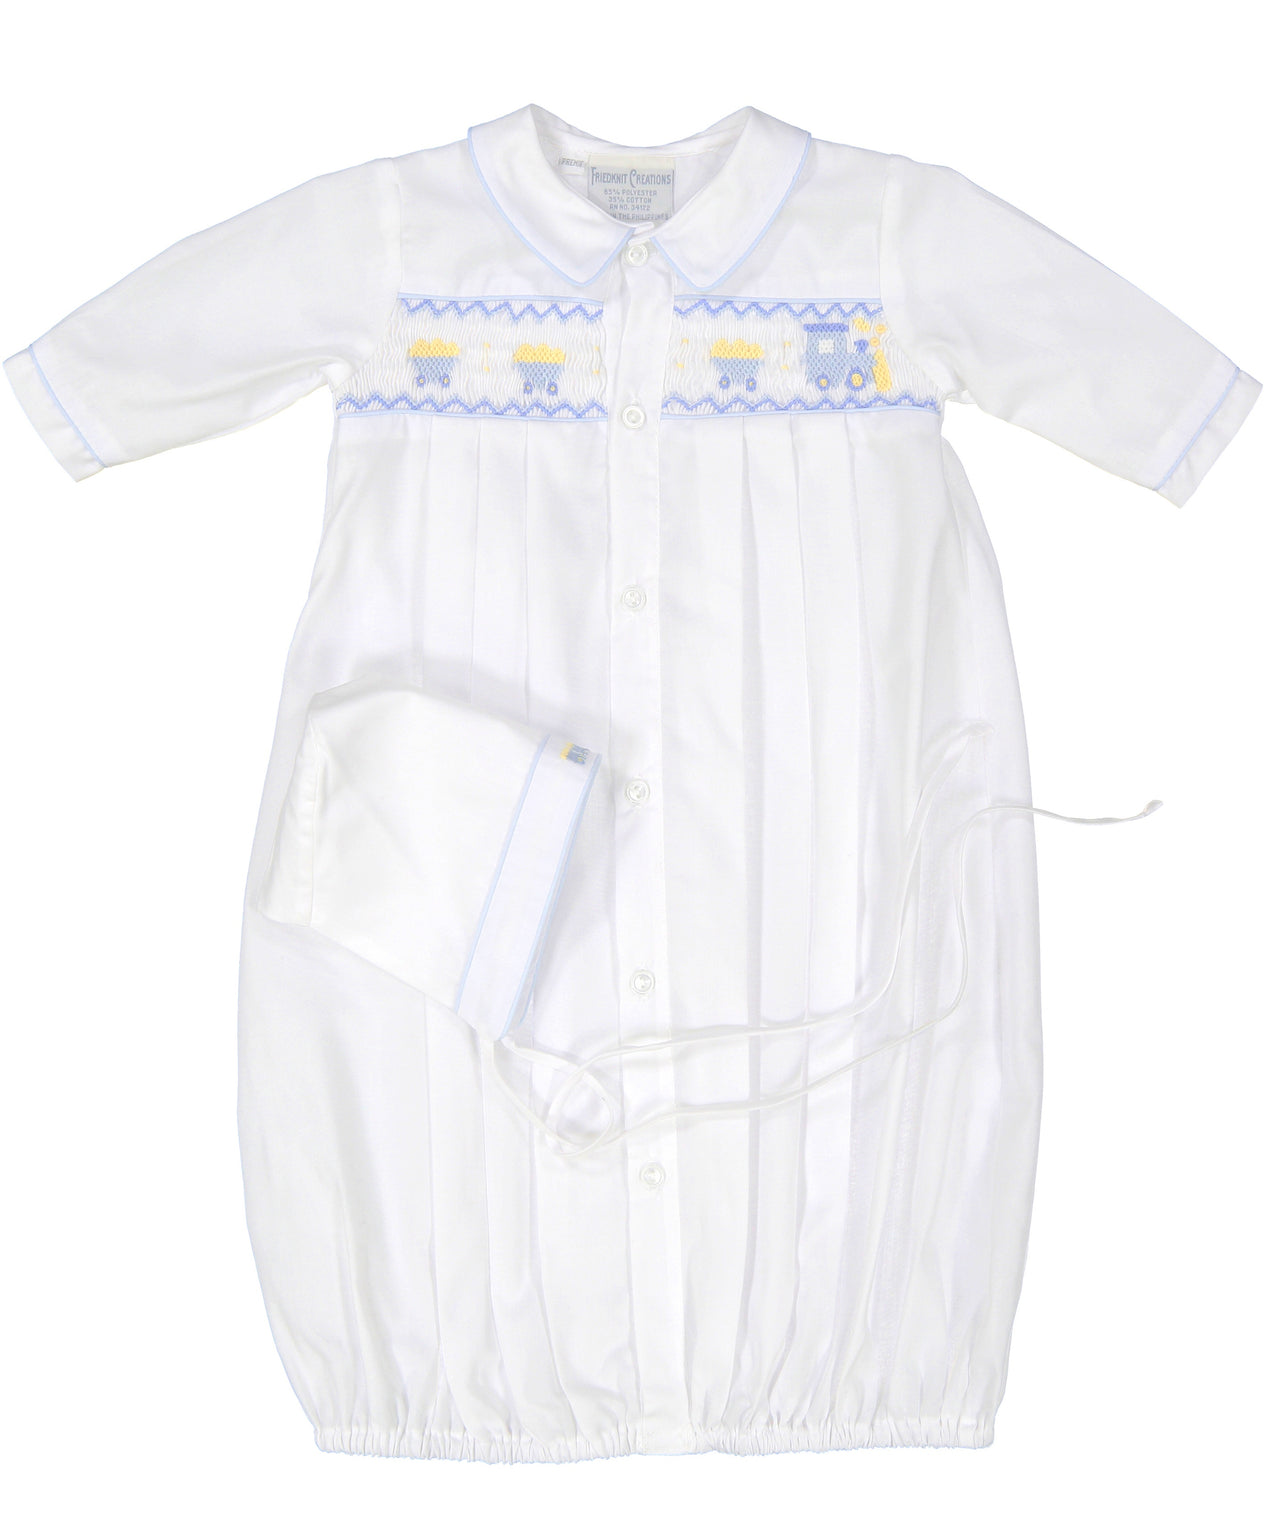 Feltman Brothers Train Smocked Gown & Hat White/Blue Preemie 1169P 5010